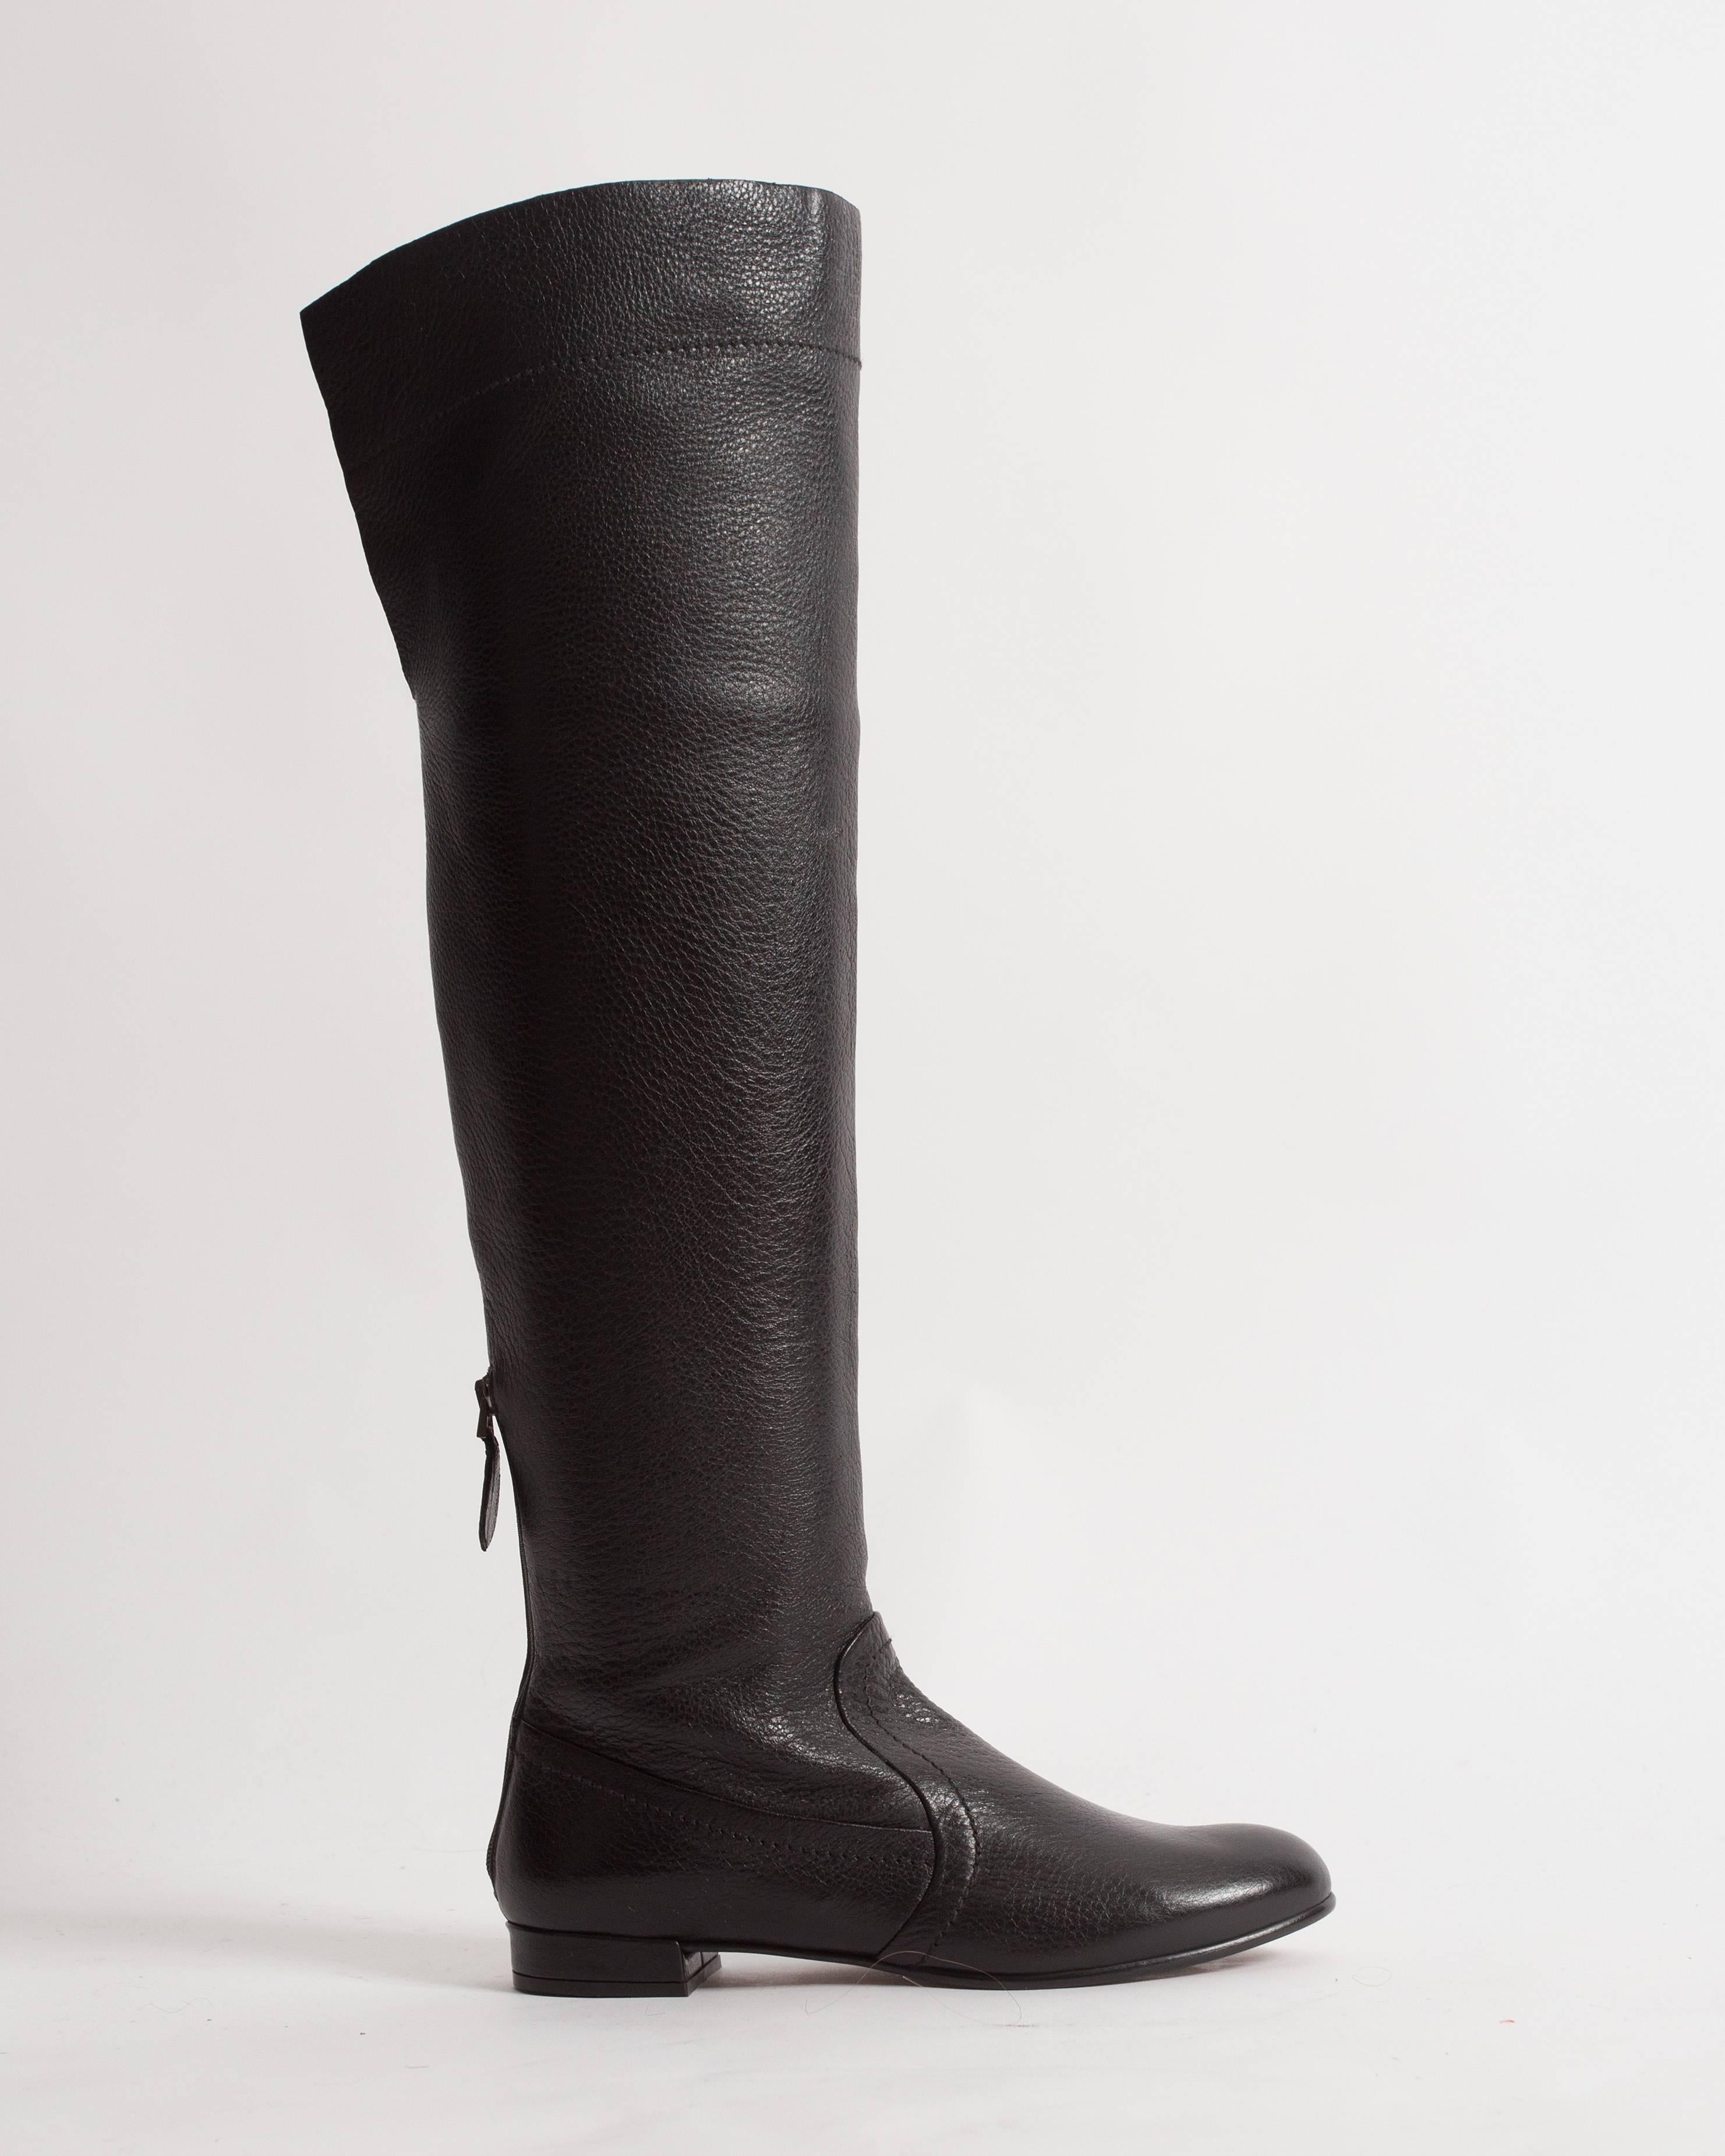 Alaia black leather riding boots, size 37.5, round toe, zip fastening, short heel and center slits at the rear. 

US  7 - UK 4.5